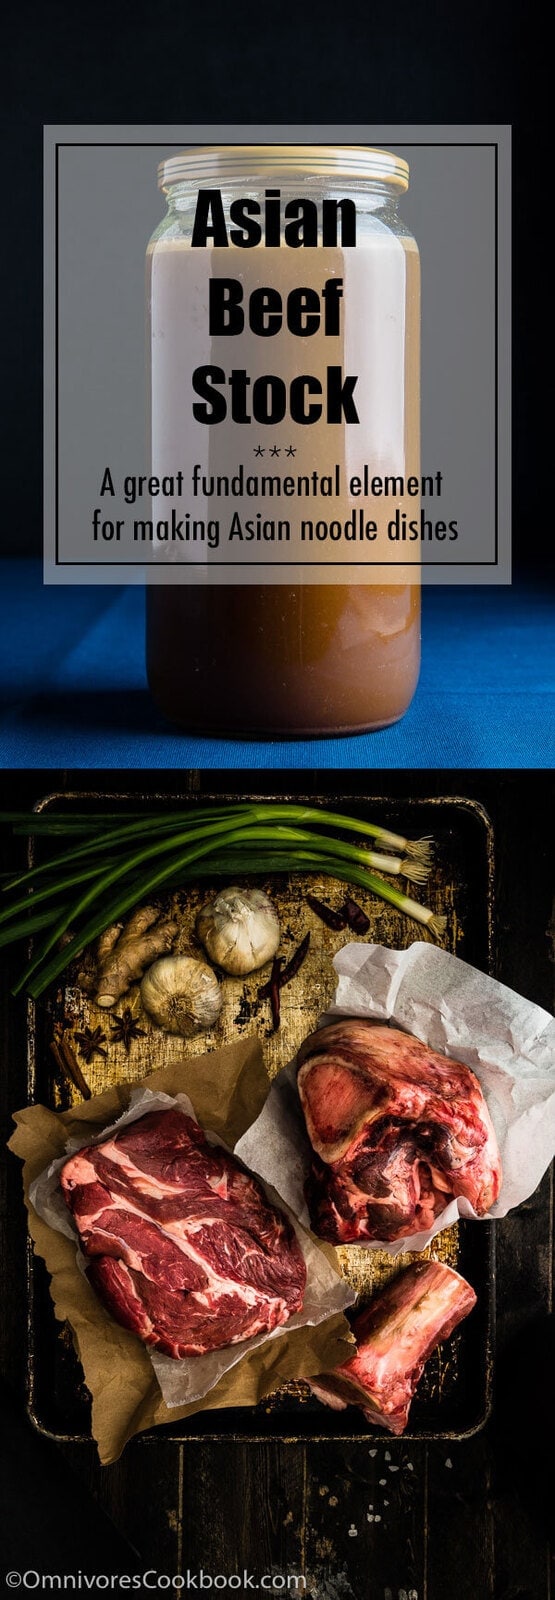 Asian beef stock - A great fundamental element for making Asian noodle dishes, such as Taiwan beef noodle soup and Vietnamese beef pho | omnivorescookbook.com